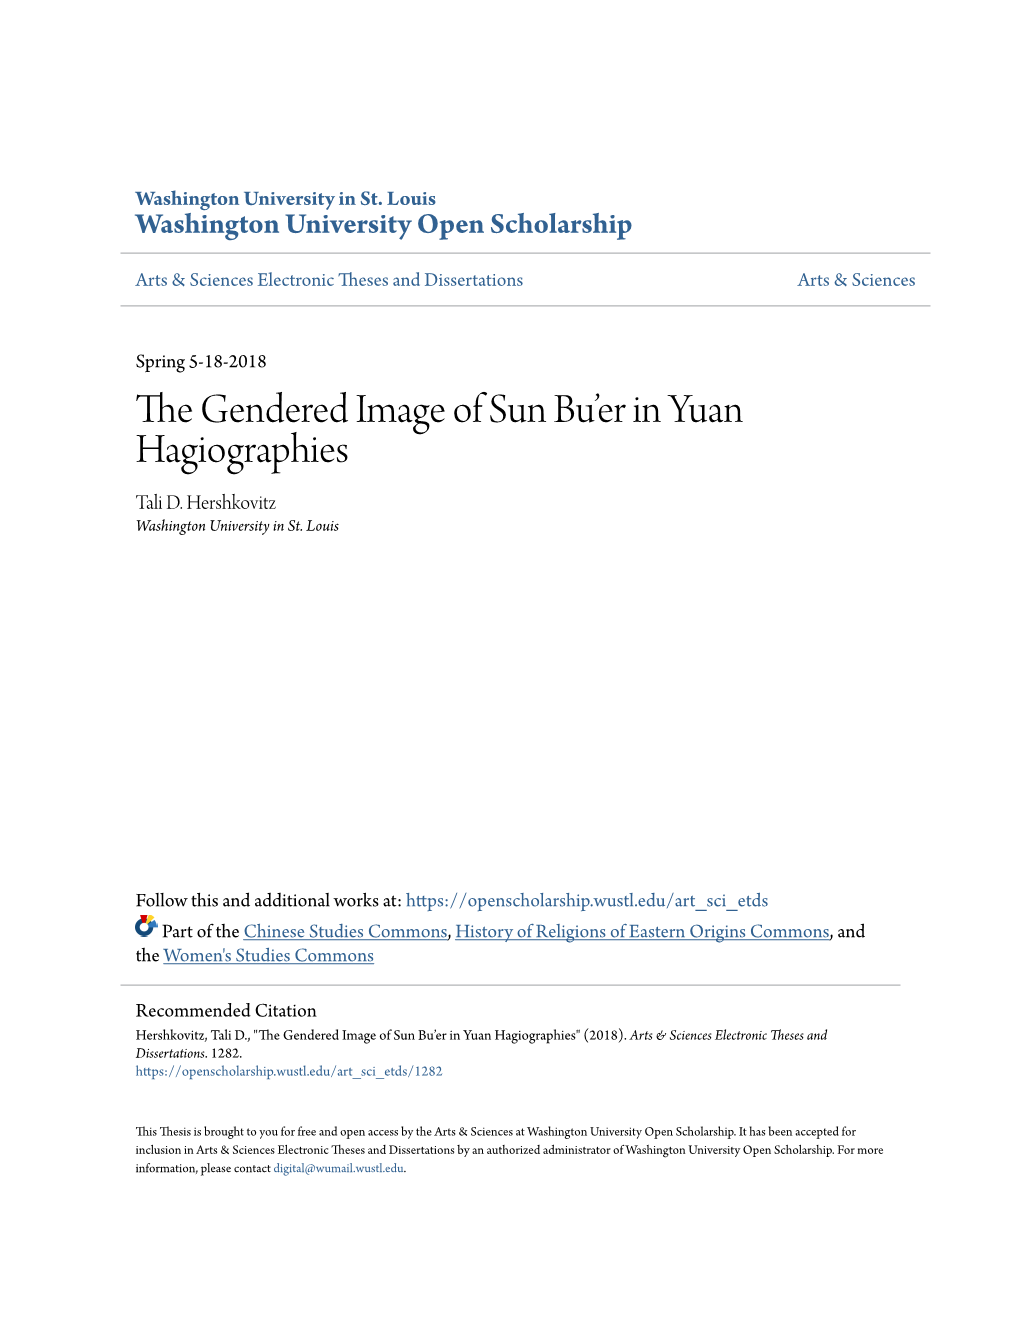 The Gendered Image of Sun Bu'er in Yuan Hagiographies